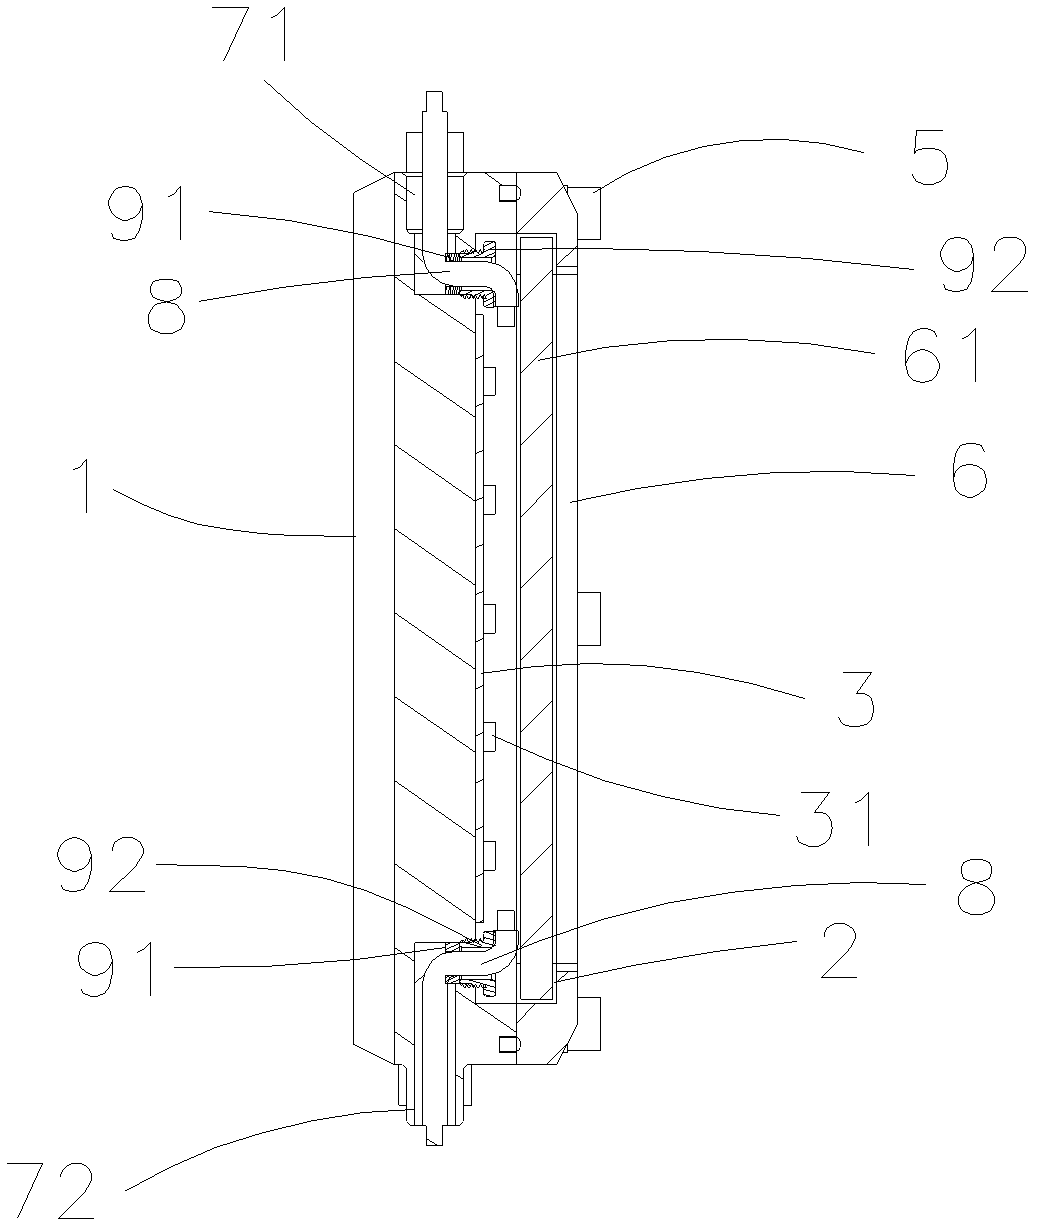 Explosion-proof LED (light emitting diode) lighting module and combination thereof